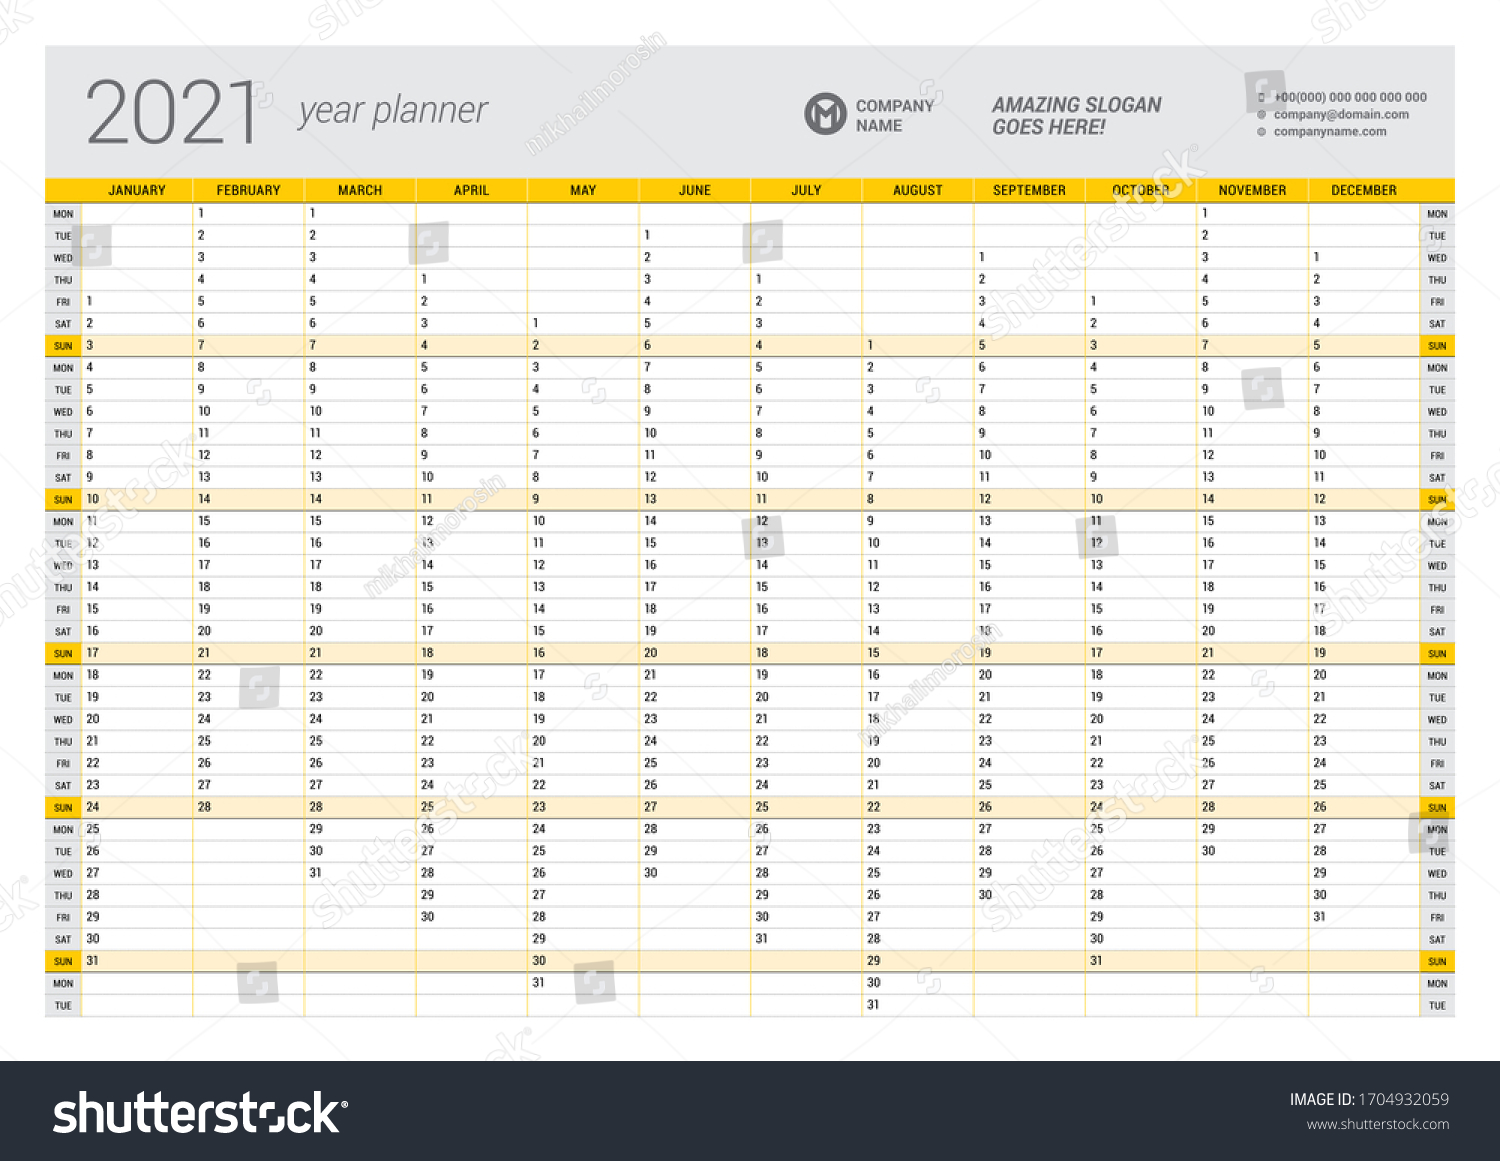 calendar yearly planner template 2021 printable stock vector royalty free 1704932062